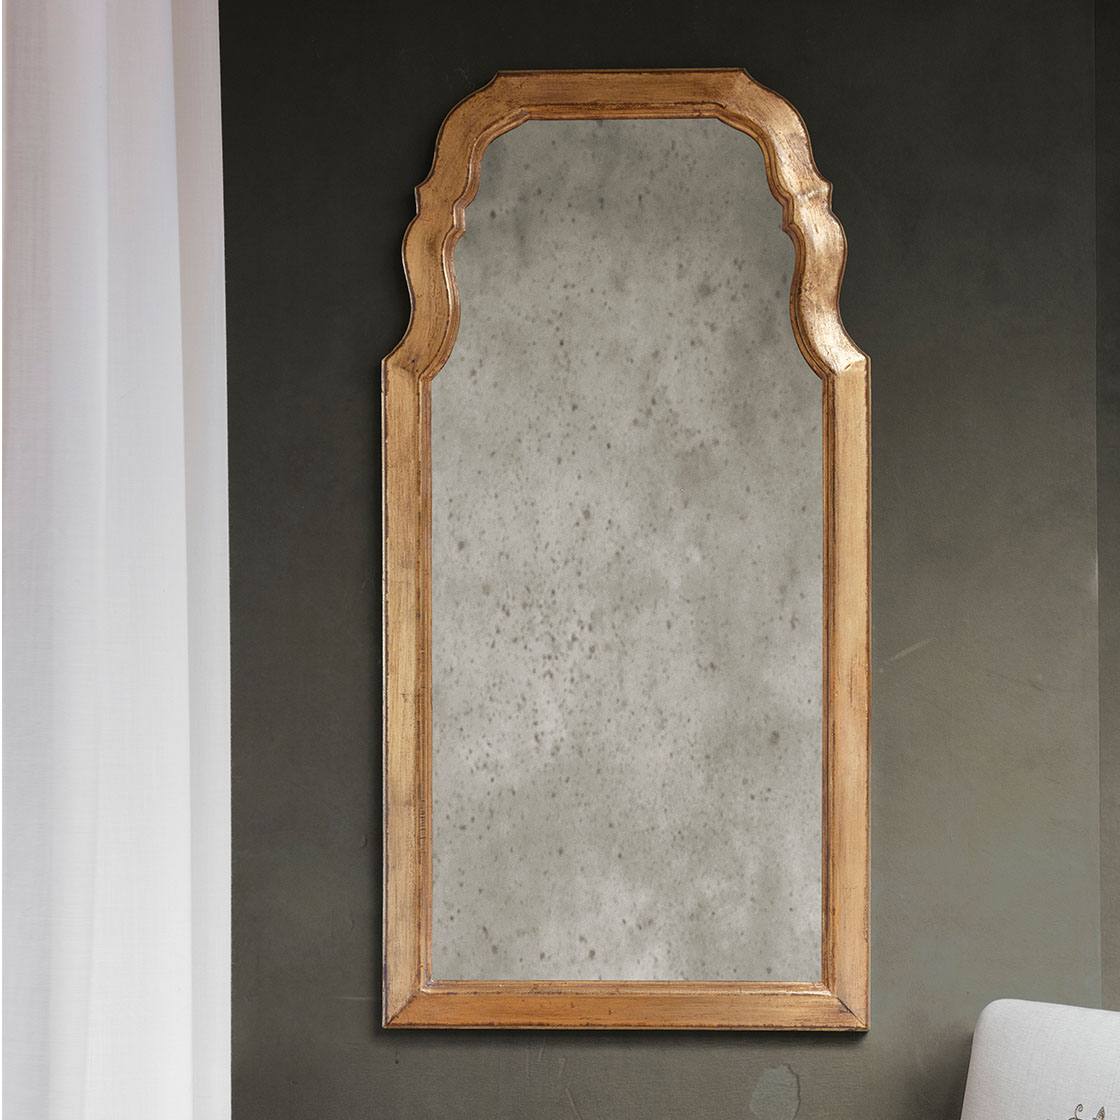 Arcus large mirror in Burnt gold - Beaumont & Fletcher